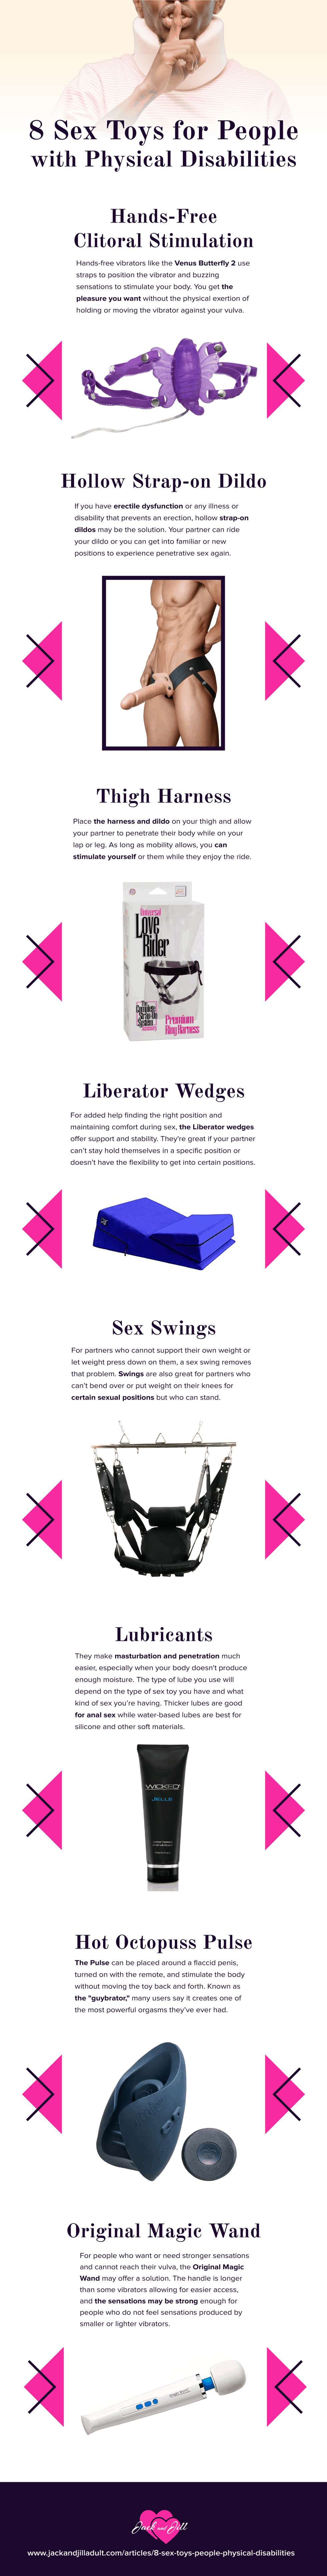 Infographic for 8 Sex Toys for People with Physical Disabilities